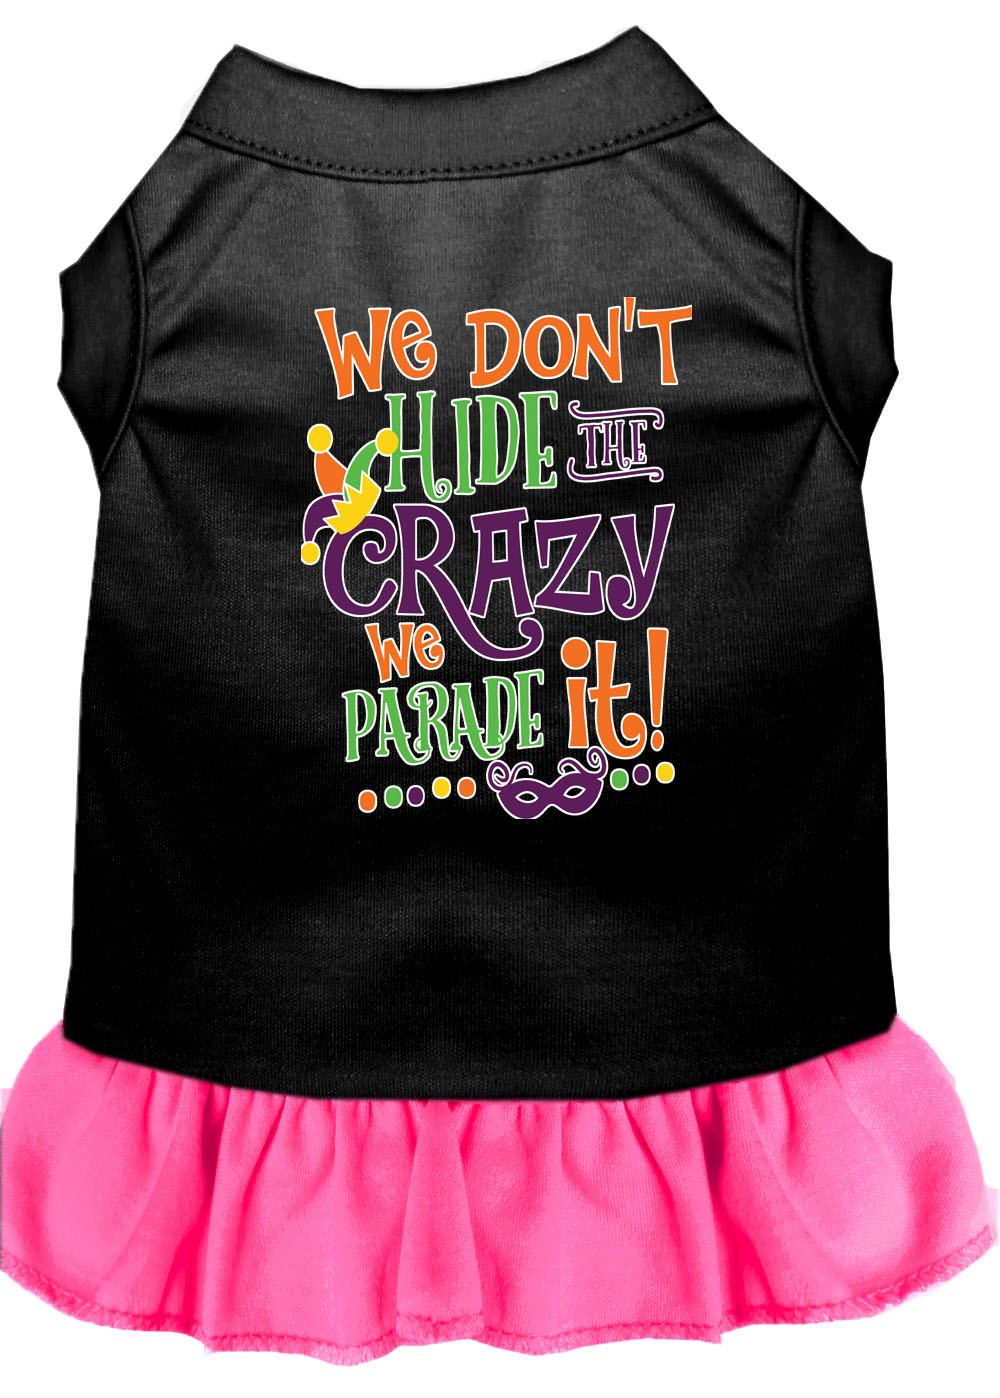 We Don't Hide the Crazy Screen Print Mardi Gras Dog Dress Black with Bright Pink Lg